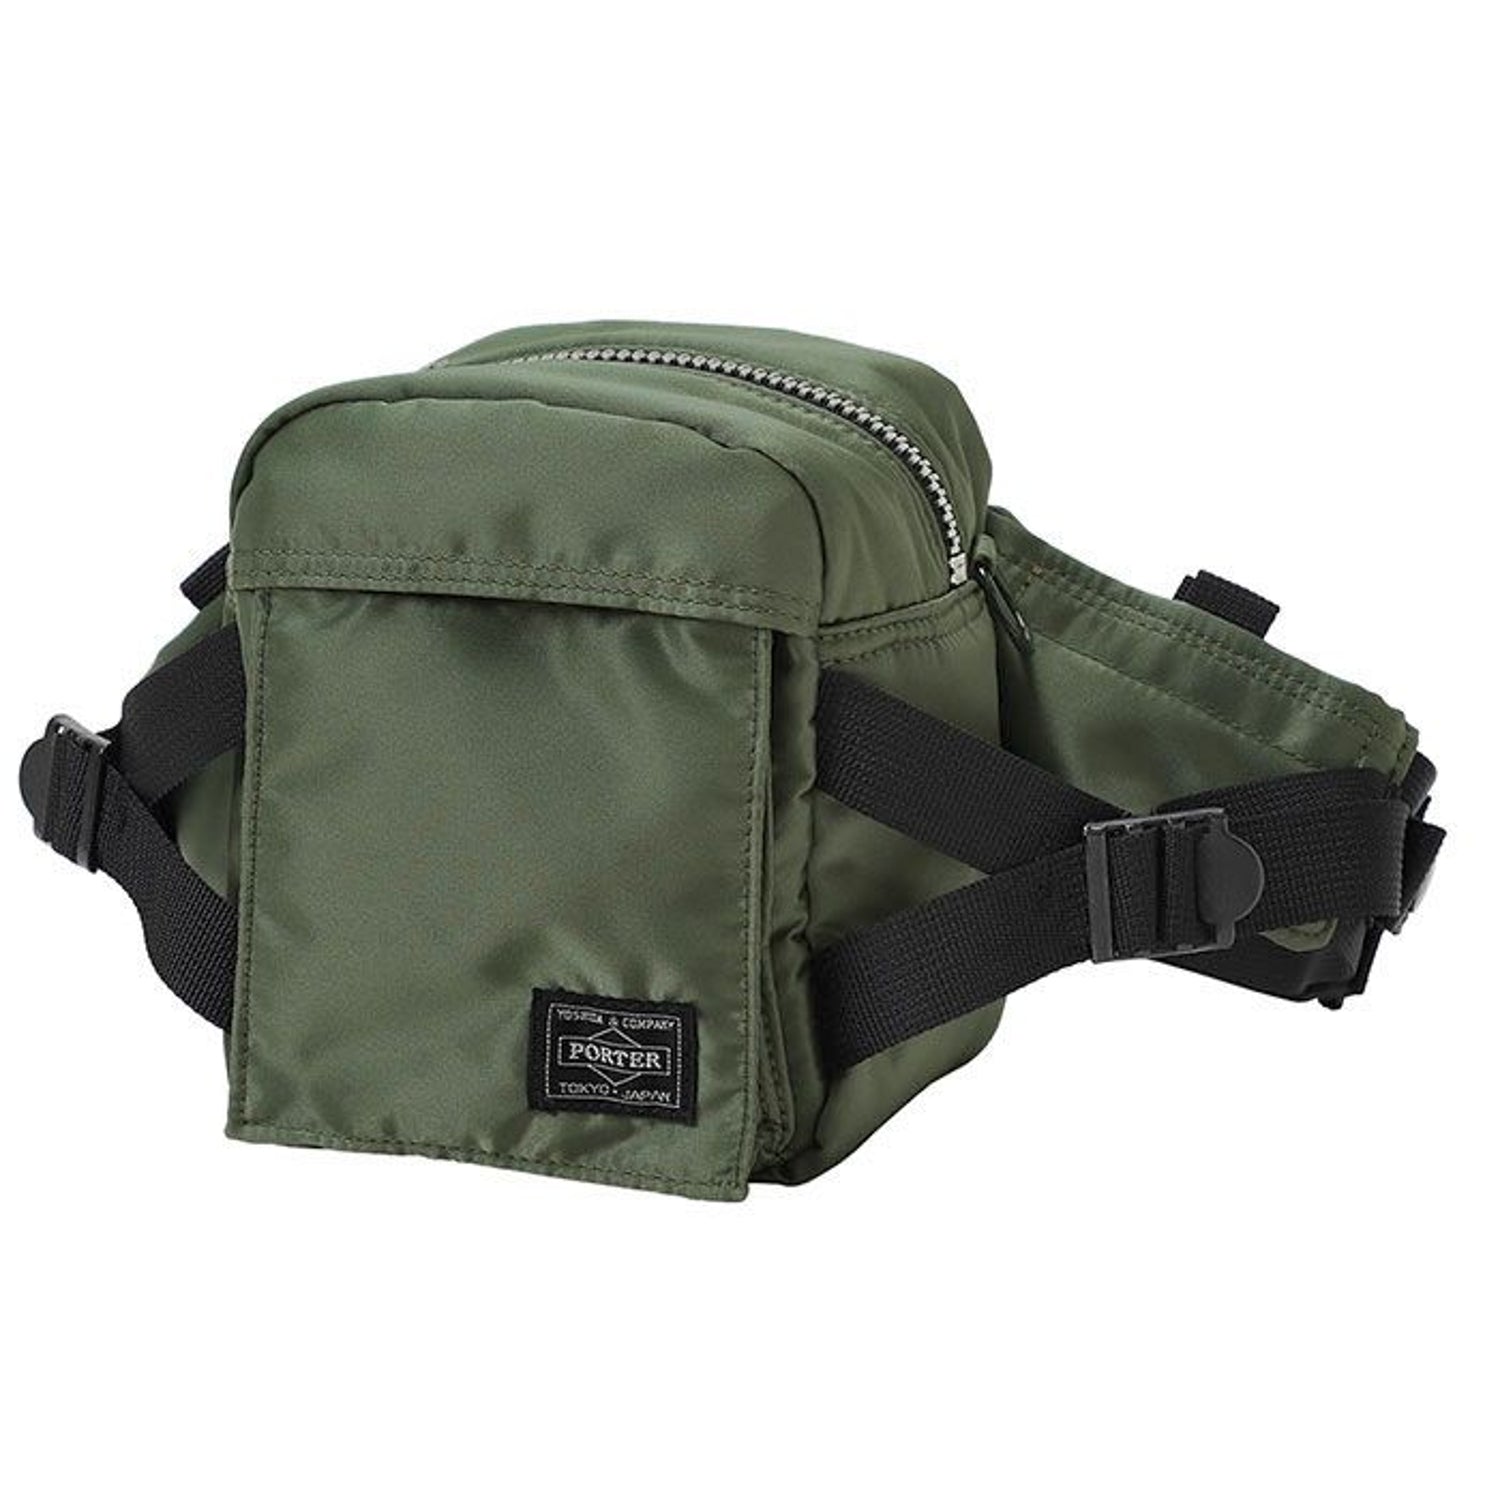 PORTER - PX Tanker Fanny Pack - (Sage Green) view 1